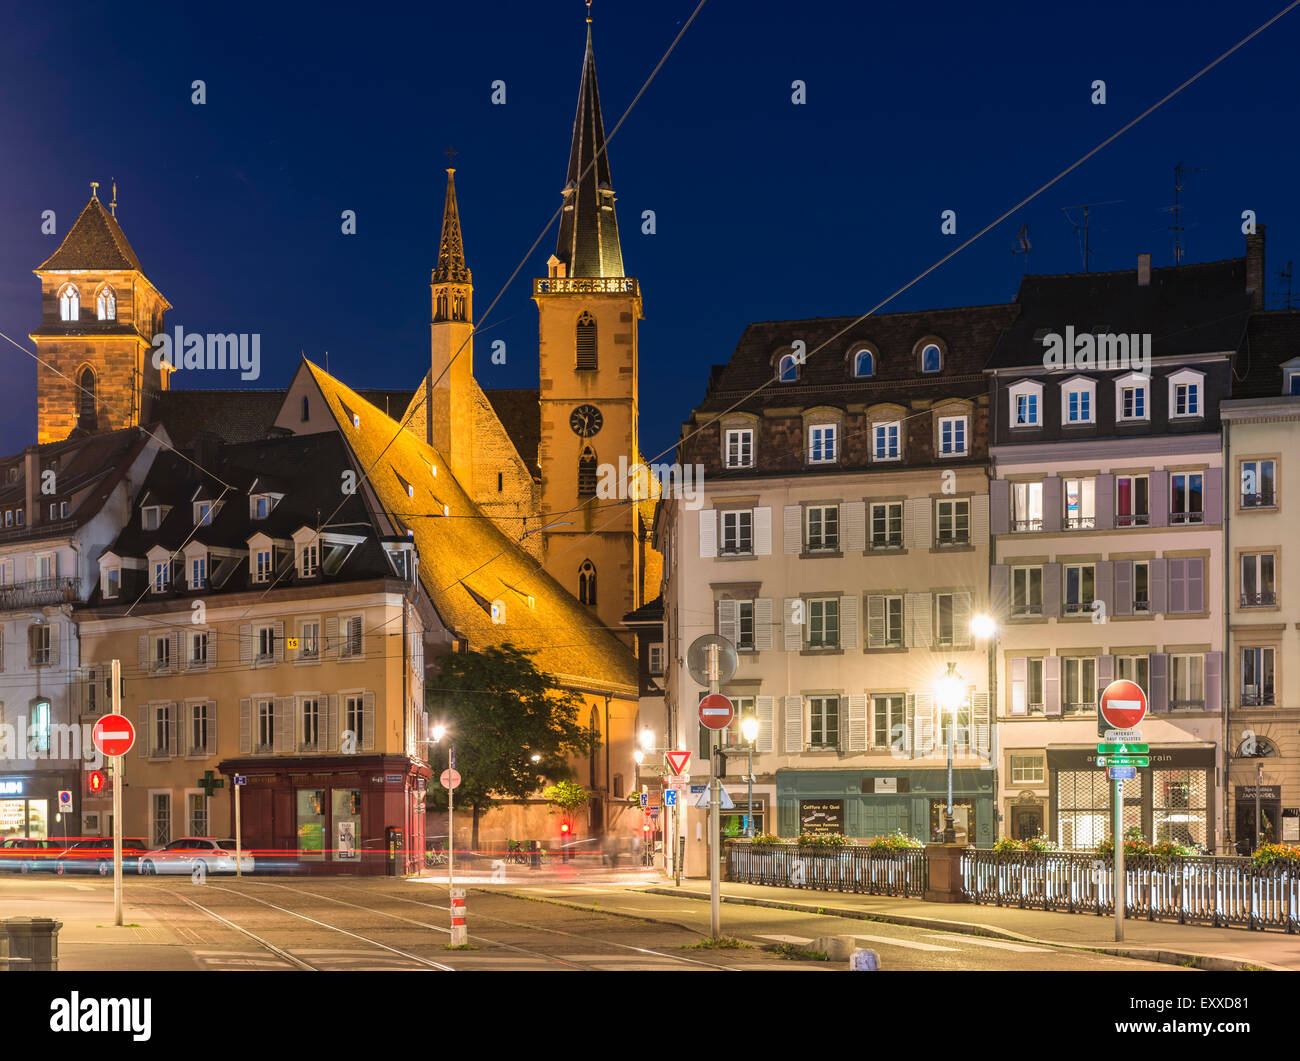 Strasbourg at night showing the Church of St Pierre-le-Vieux, Strasbourg, France, Europe Stock Photo